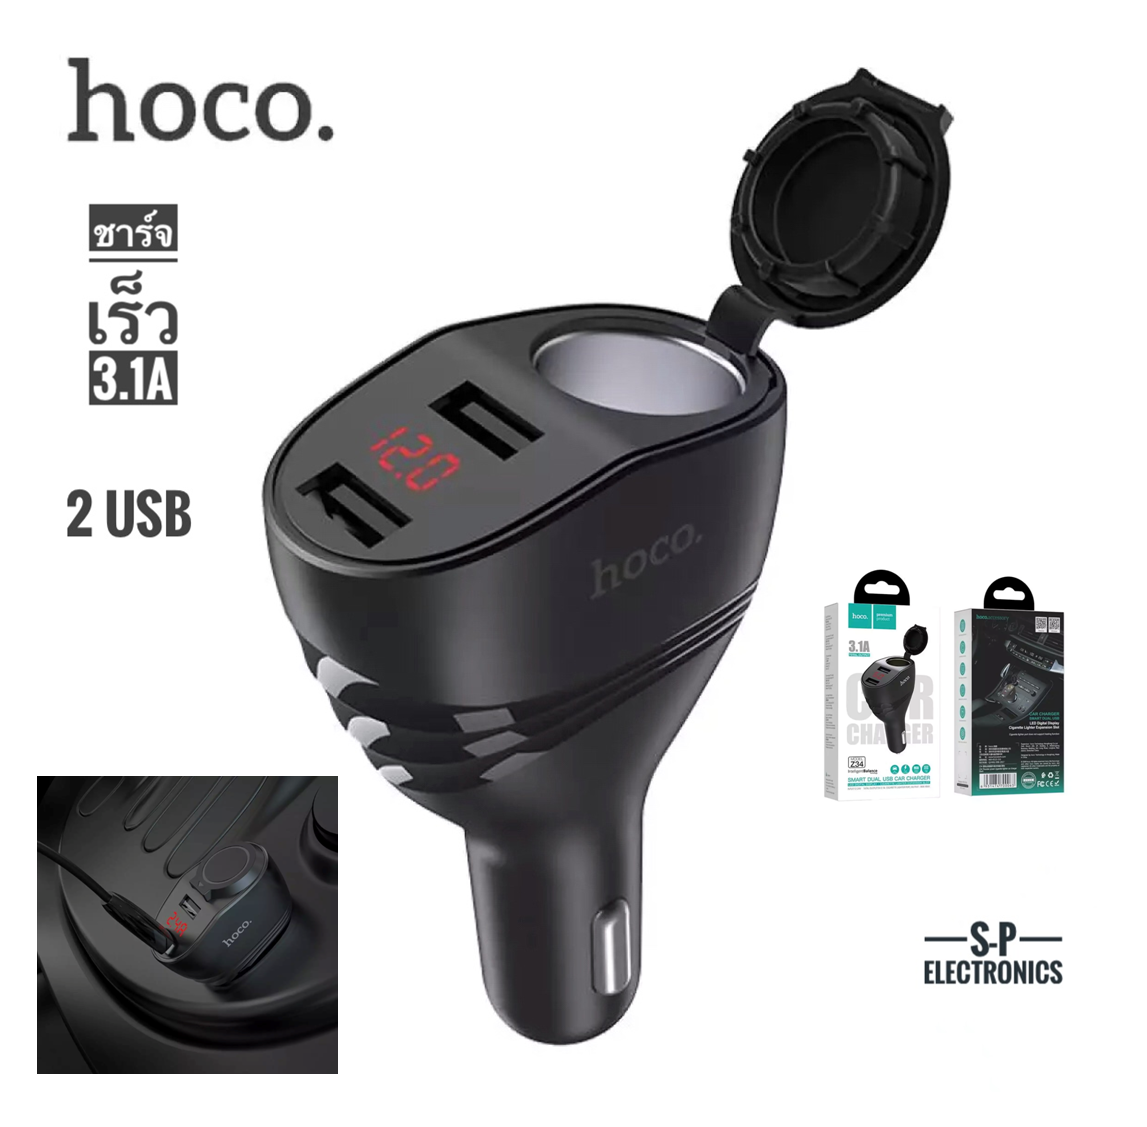 Hoco Z34 3.1A ที่ชาร์จเสียบ Power Ocean In-Car Charger With Digital Display มีช่องเสียบ 2USB